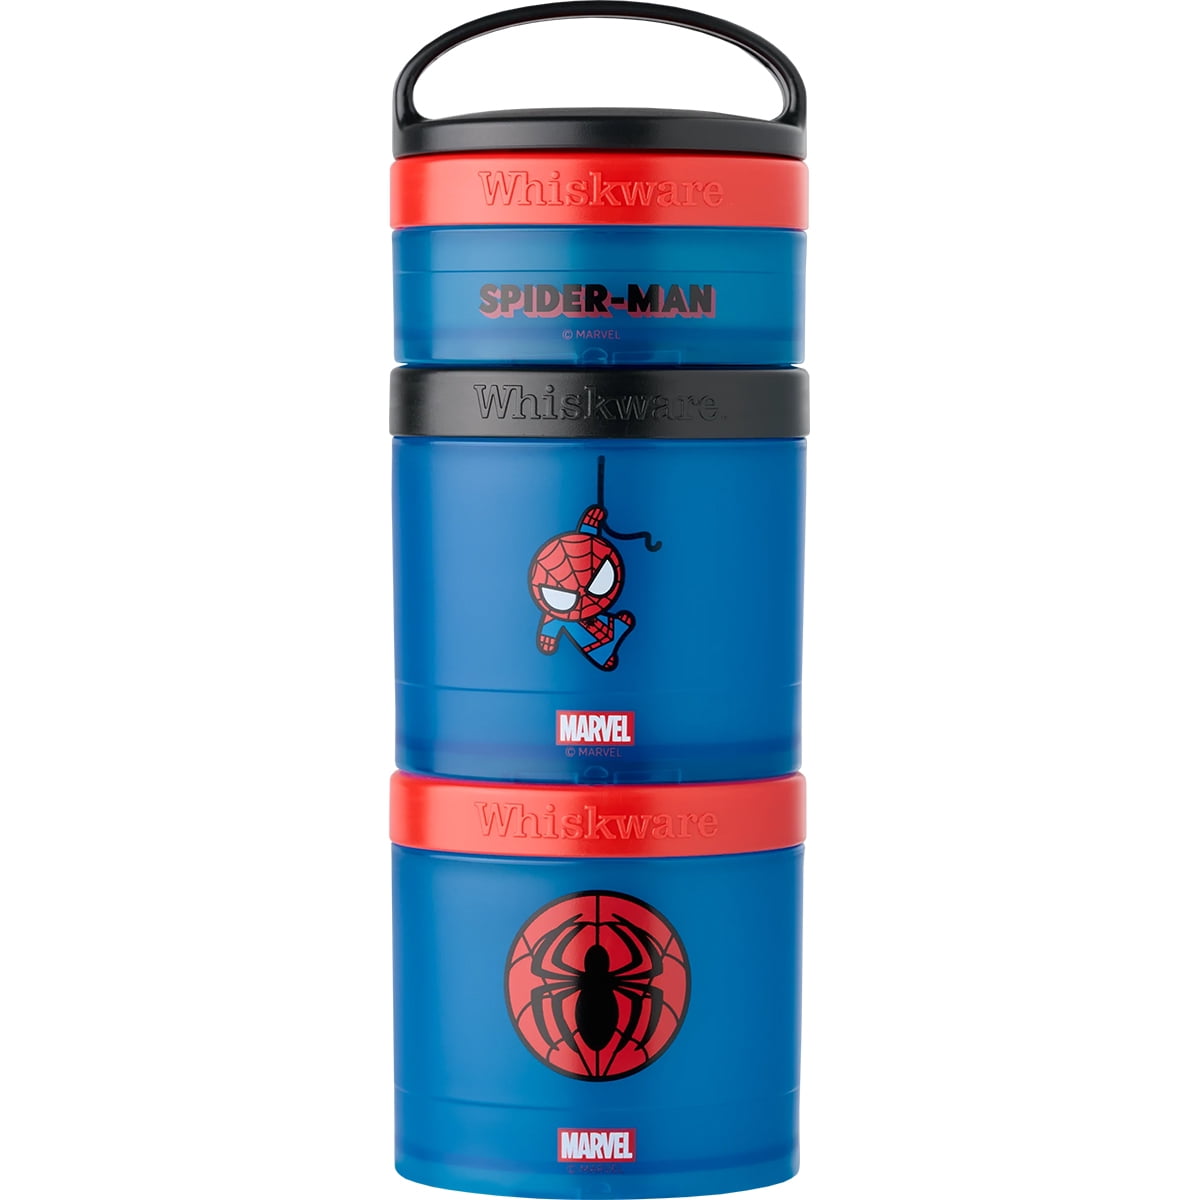 Whiskware Marvel Stackable Snack Pack Containers - Cartoon Spider-Man ...